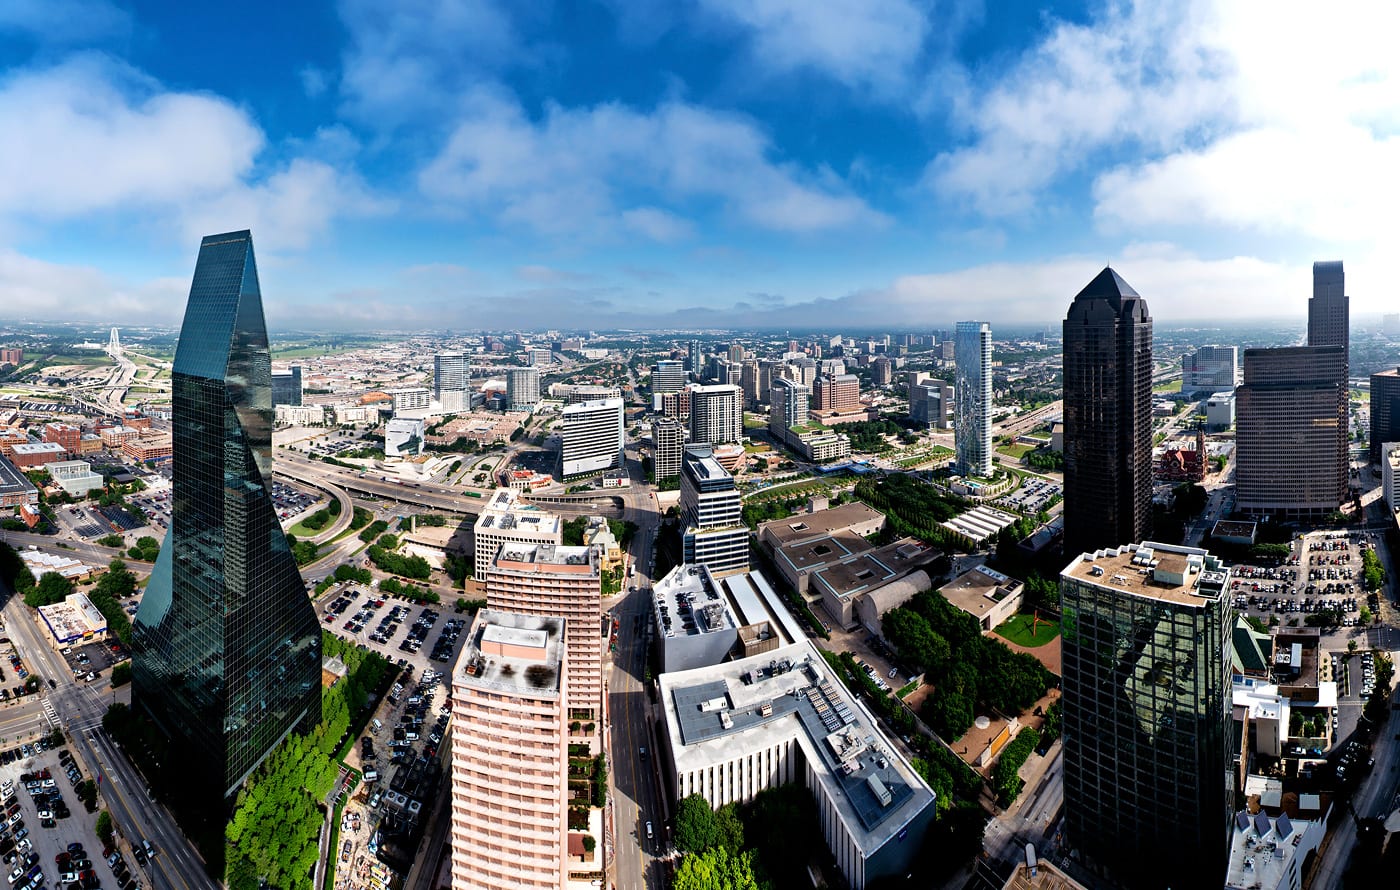 Photo: Uptown Dallas View, Justin Terveen